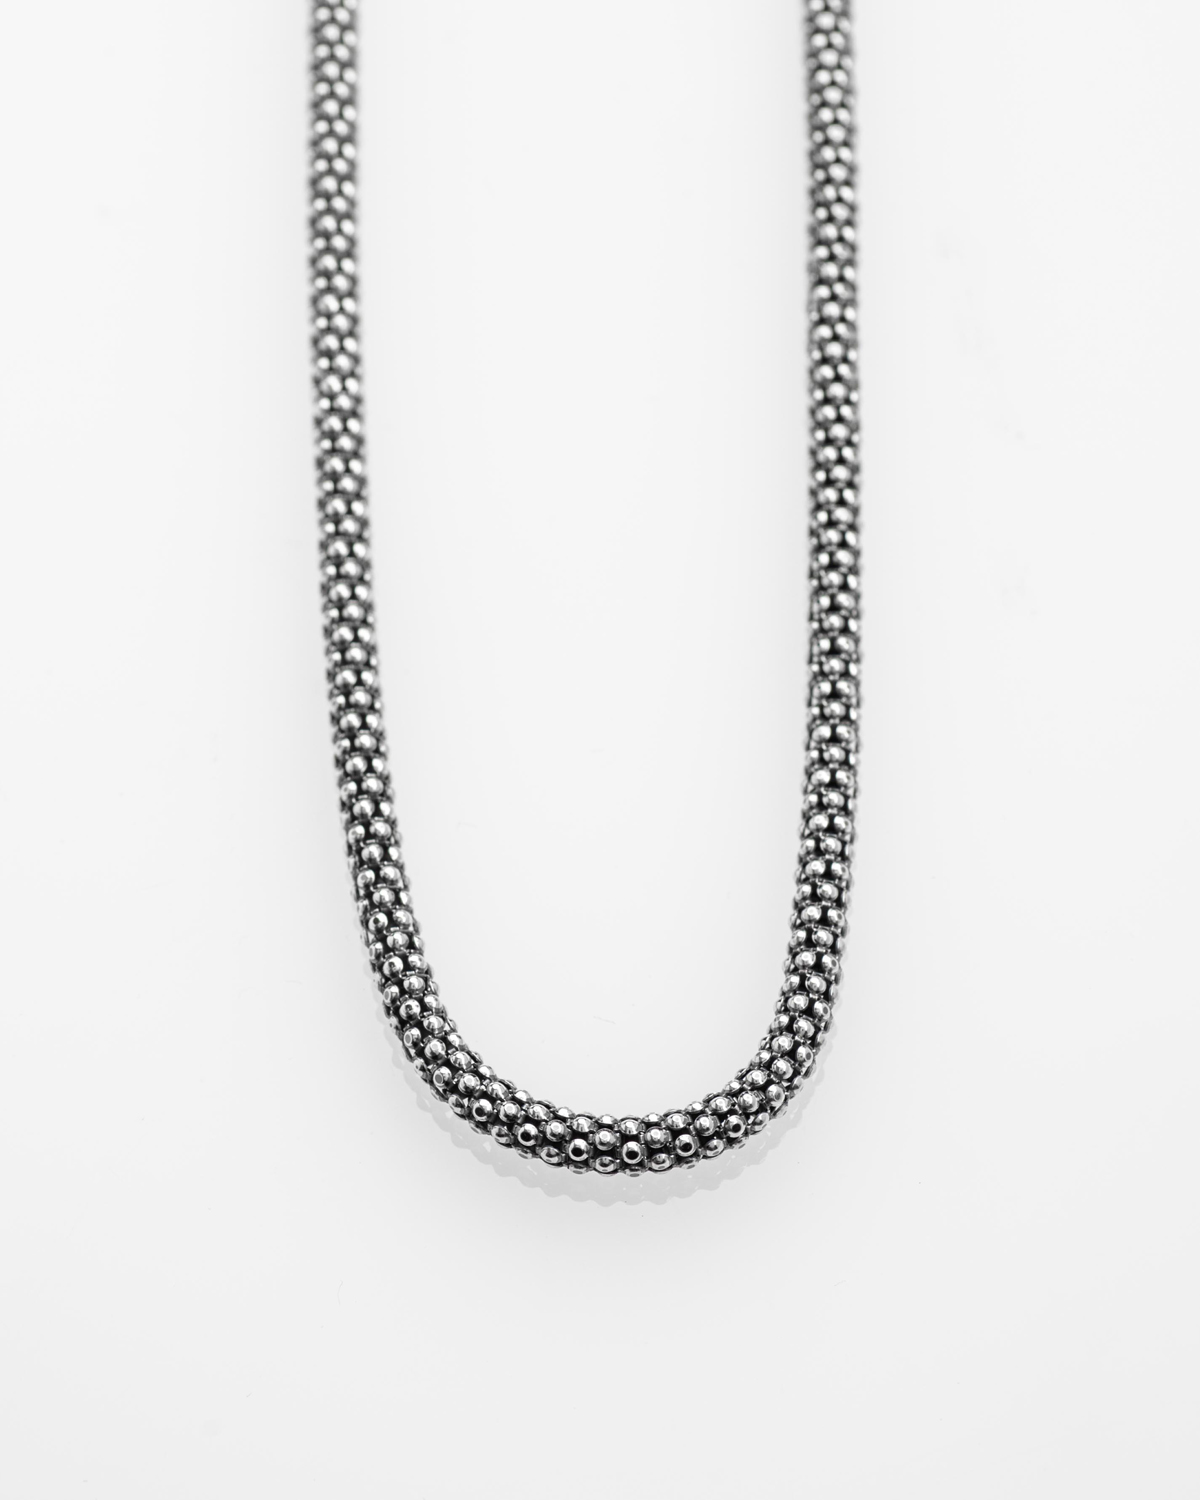 CHAIN STERLING SILVER 20″